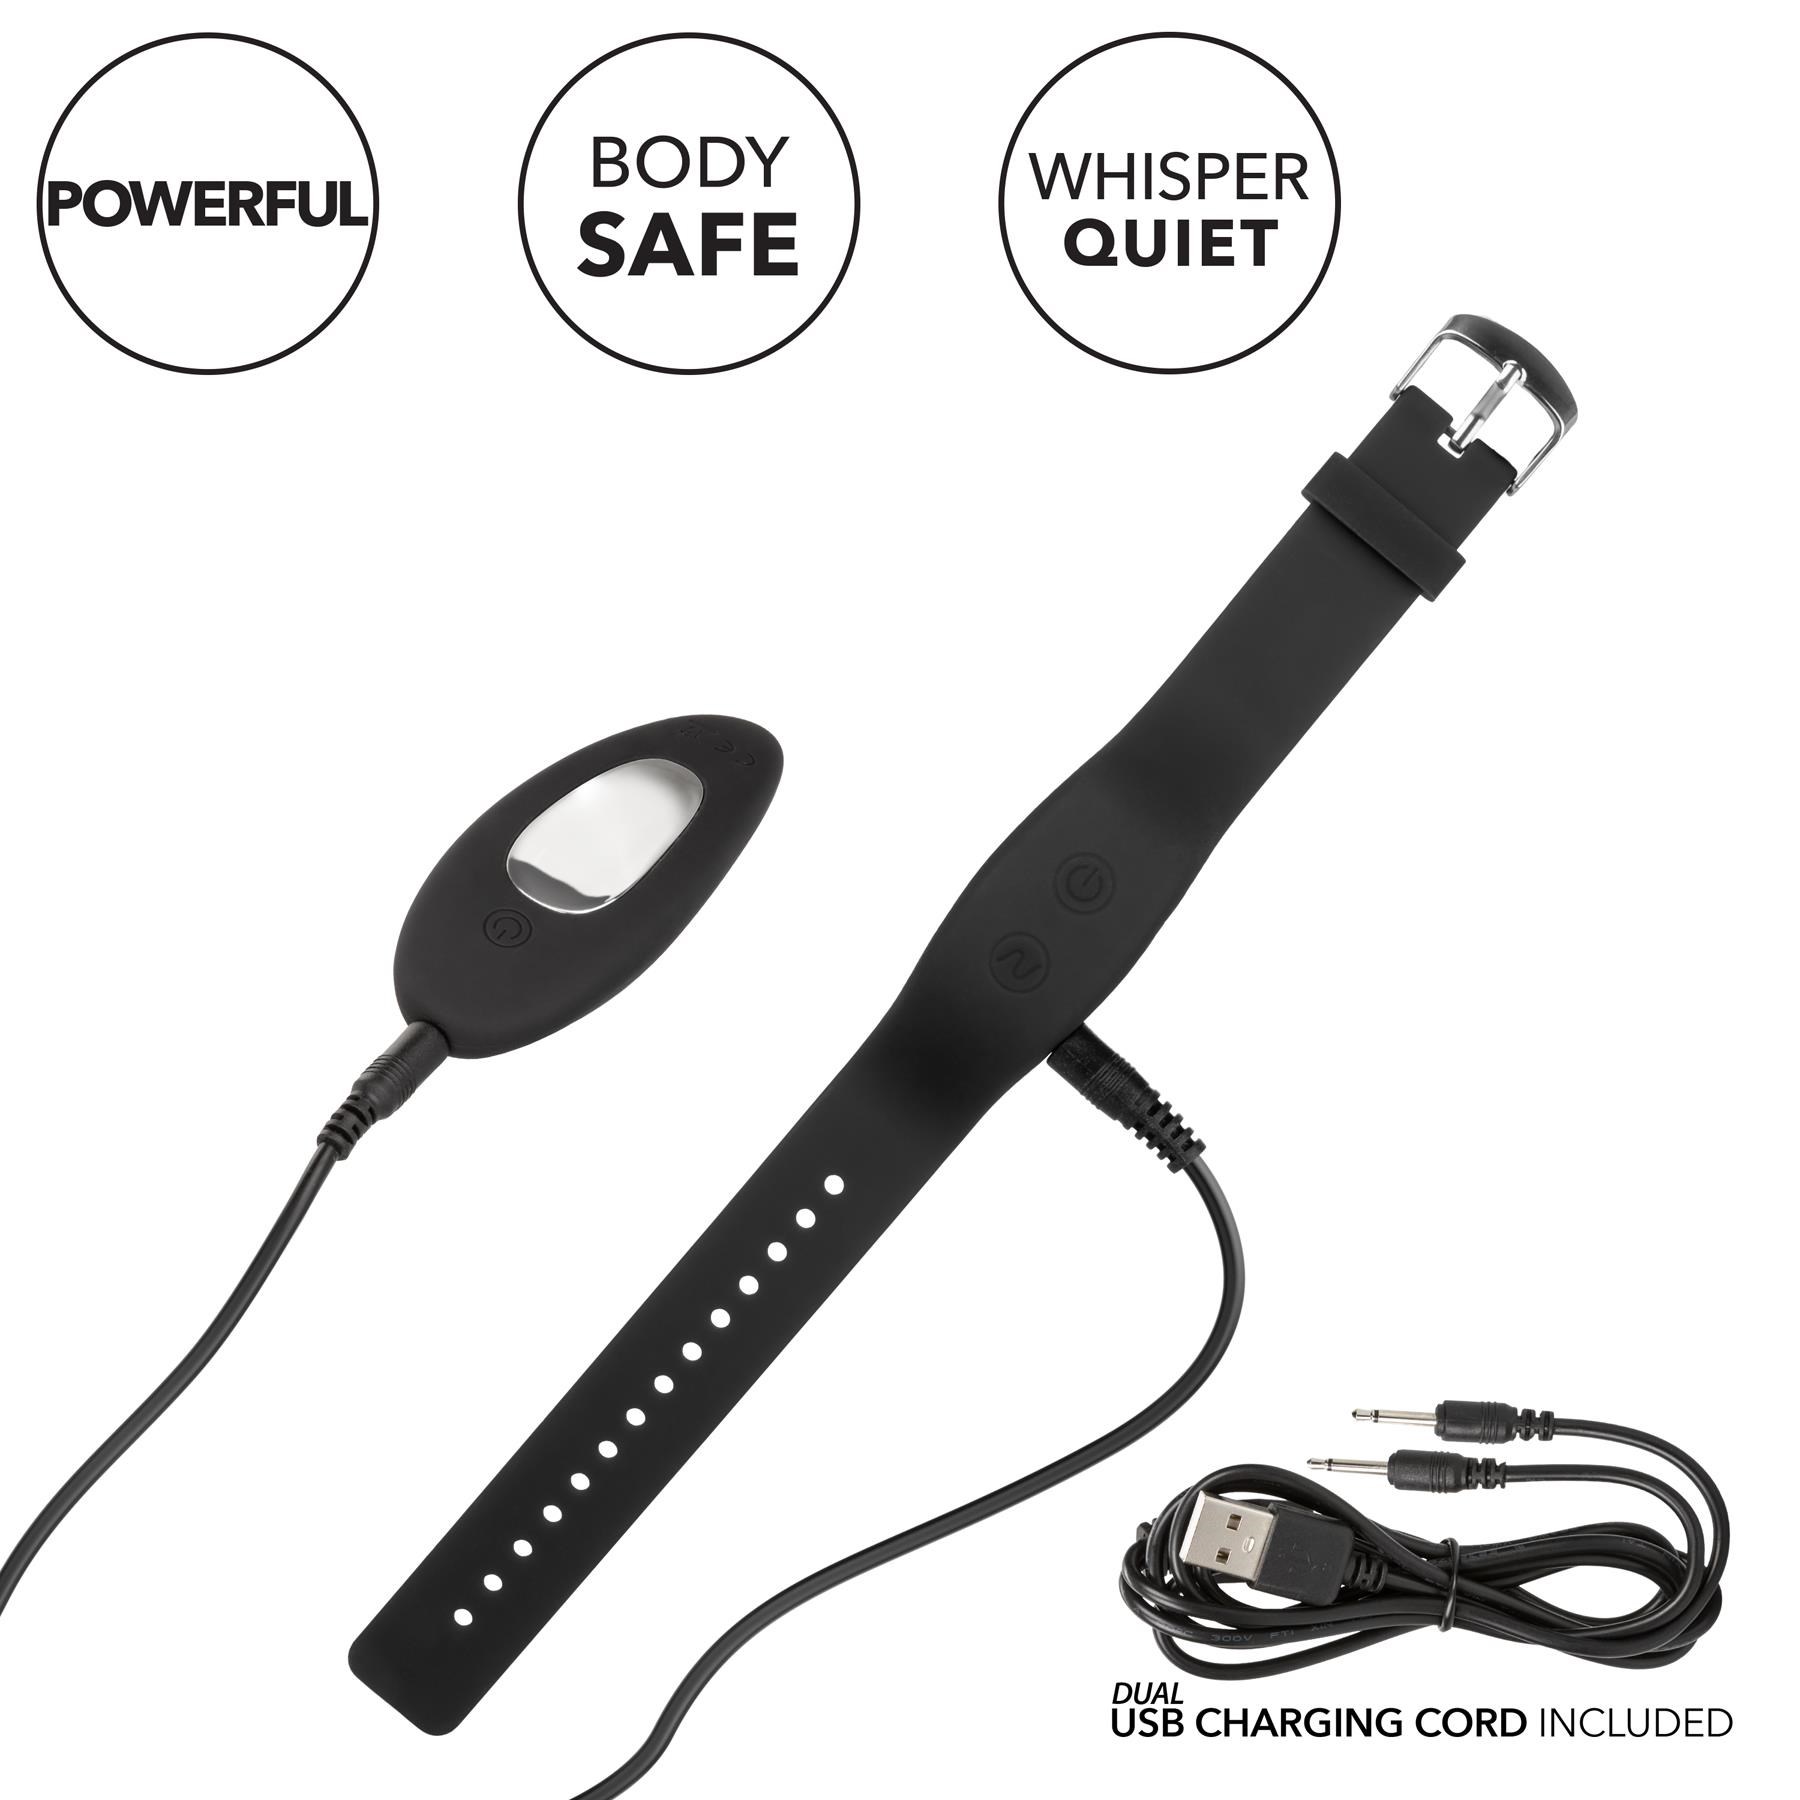 Wristband Remote Control Boxer Brief Set - Showing Where Charging Cables are Placed